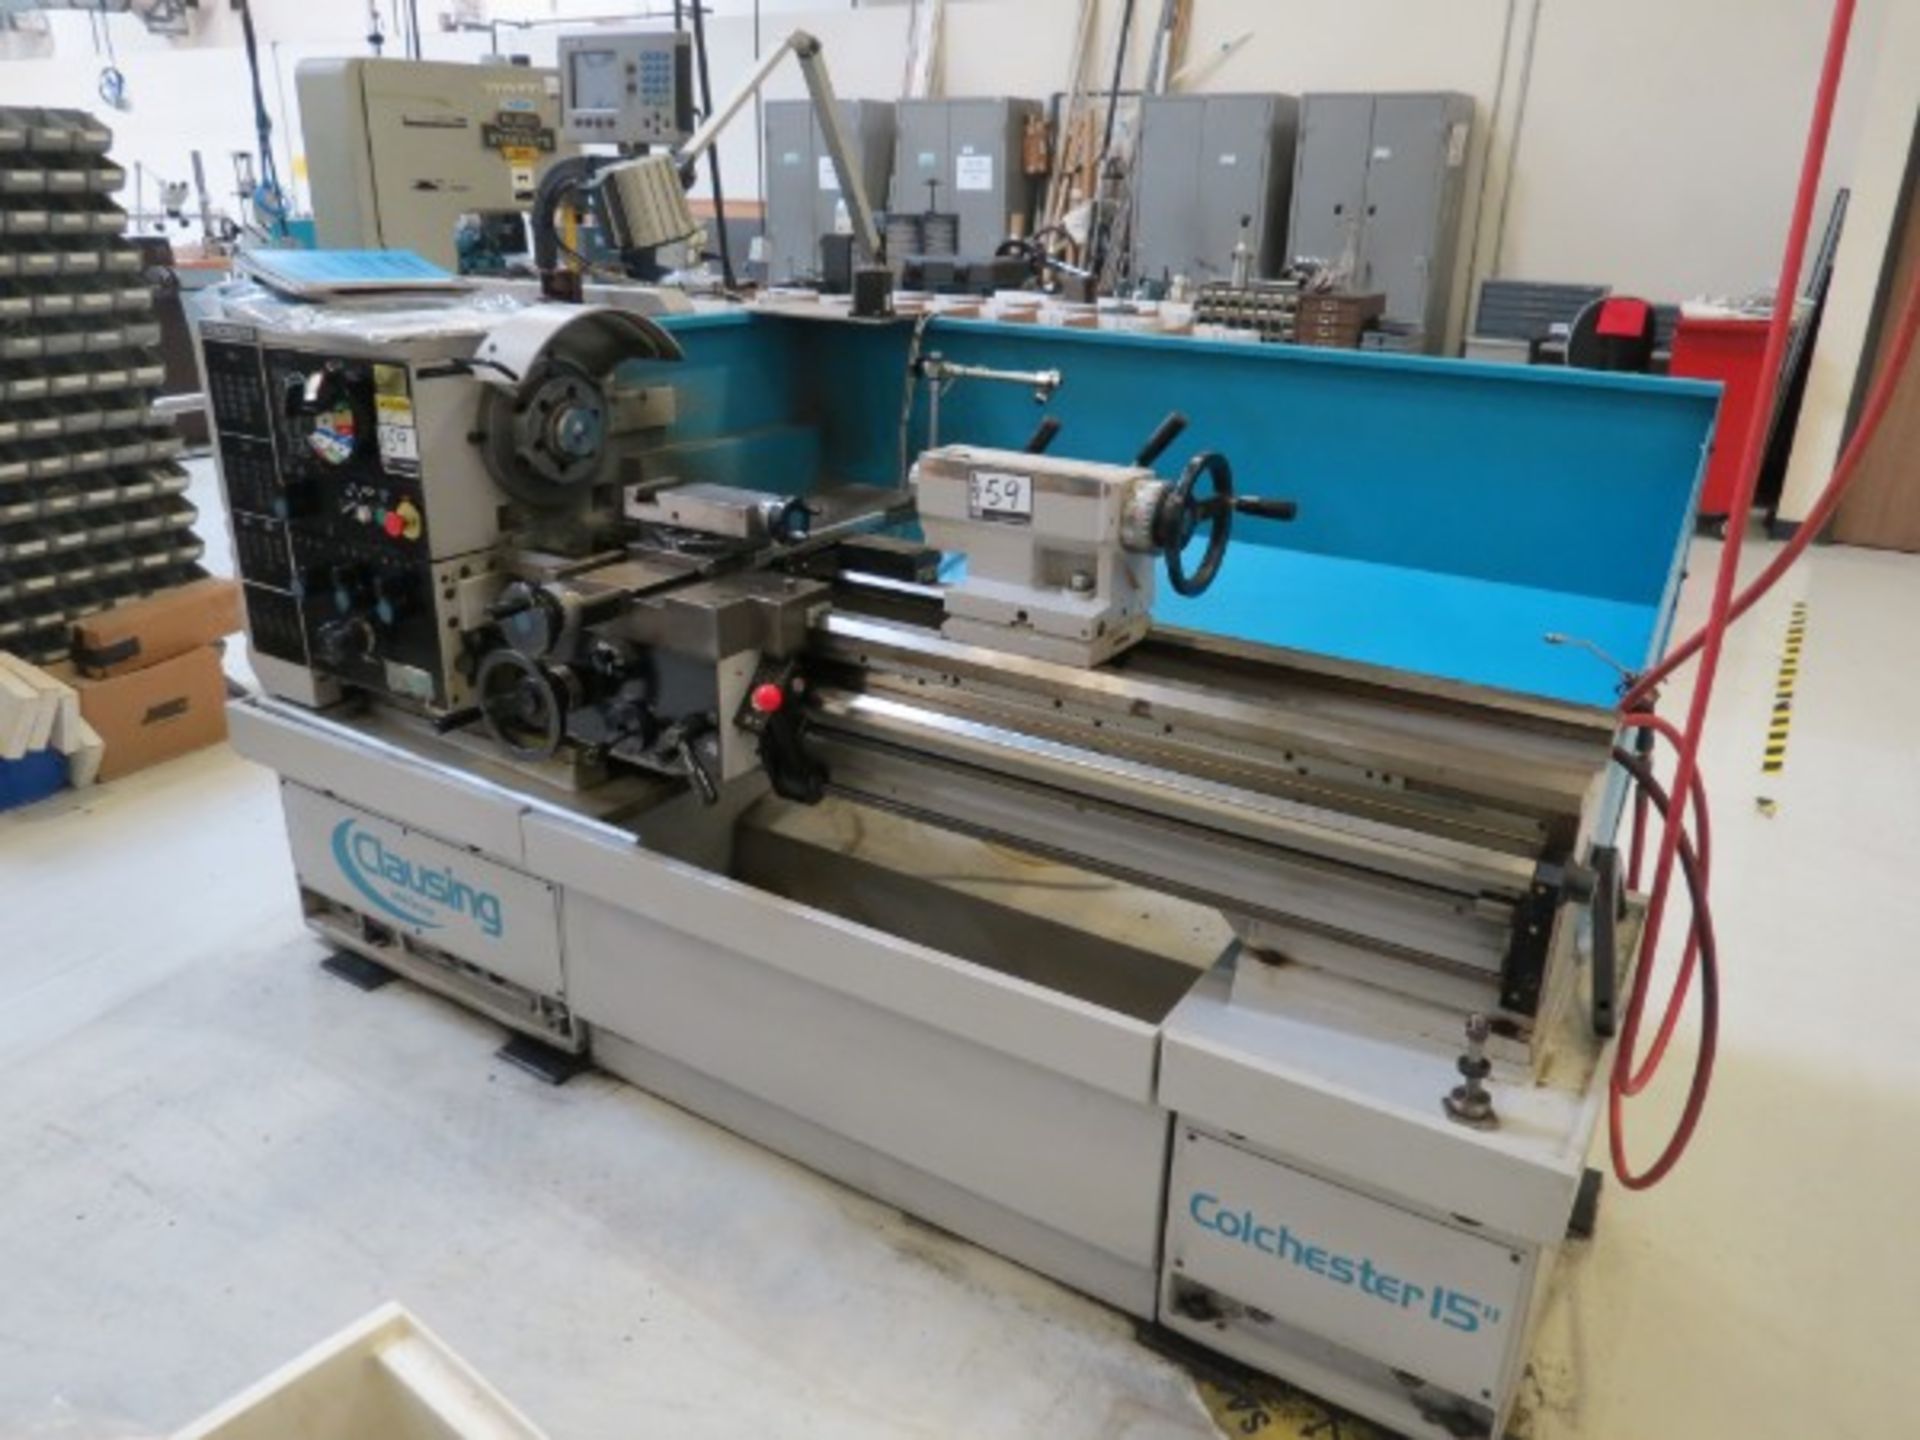 Clausing Colchester 15” Engine Lathe, 15” Sw x 50” centers, I/M threading, DRO, s/n GG0588, New 2005 - Image 2 of 6